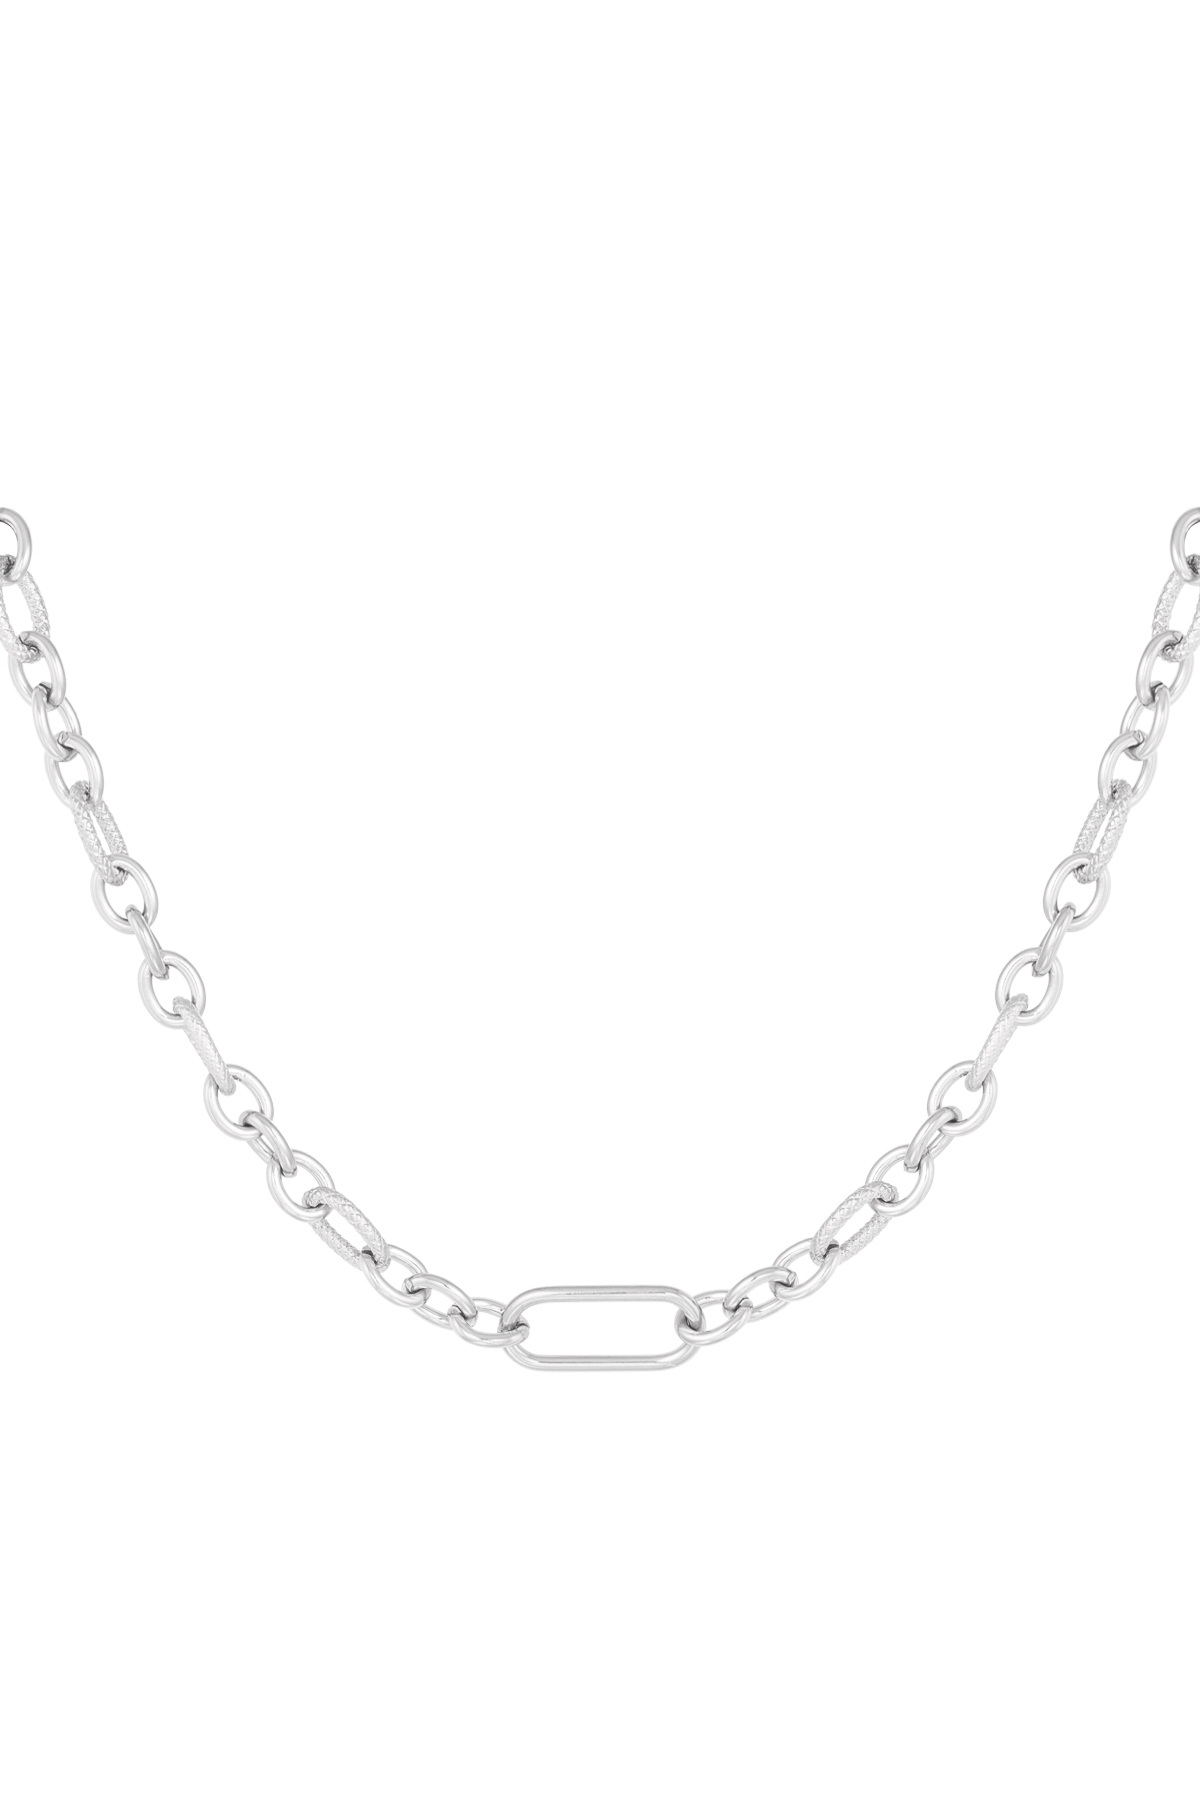 Necklace different links - silver h5 